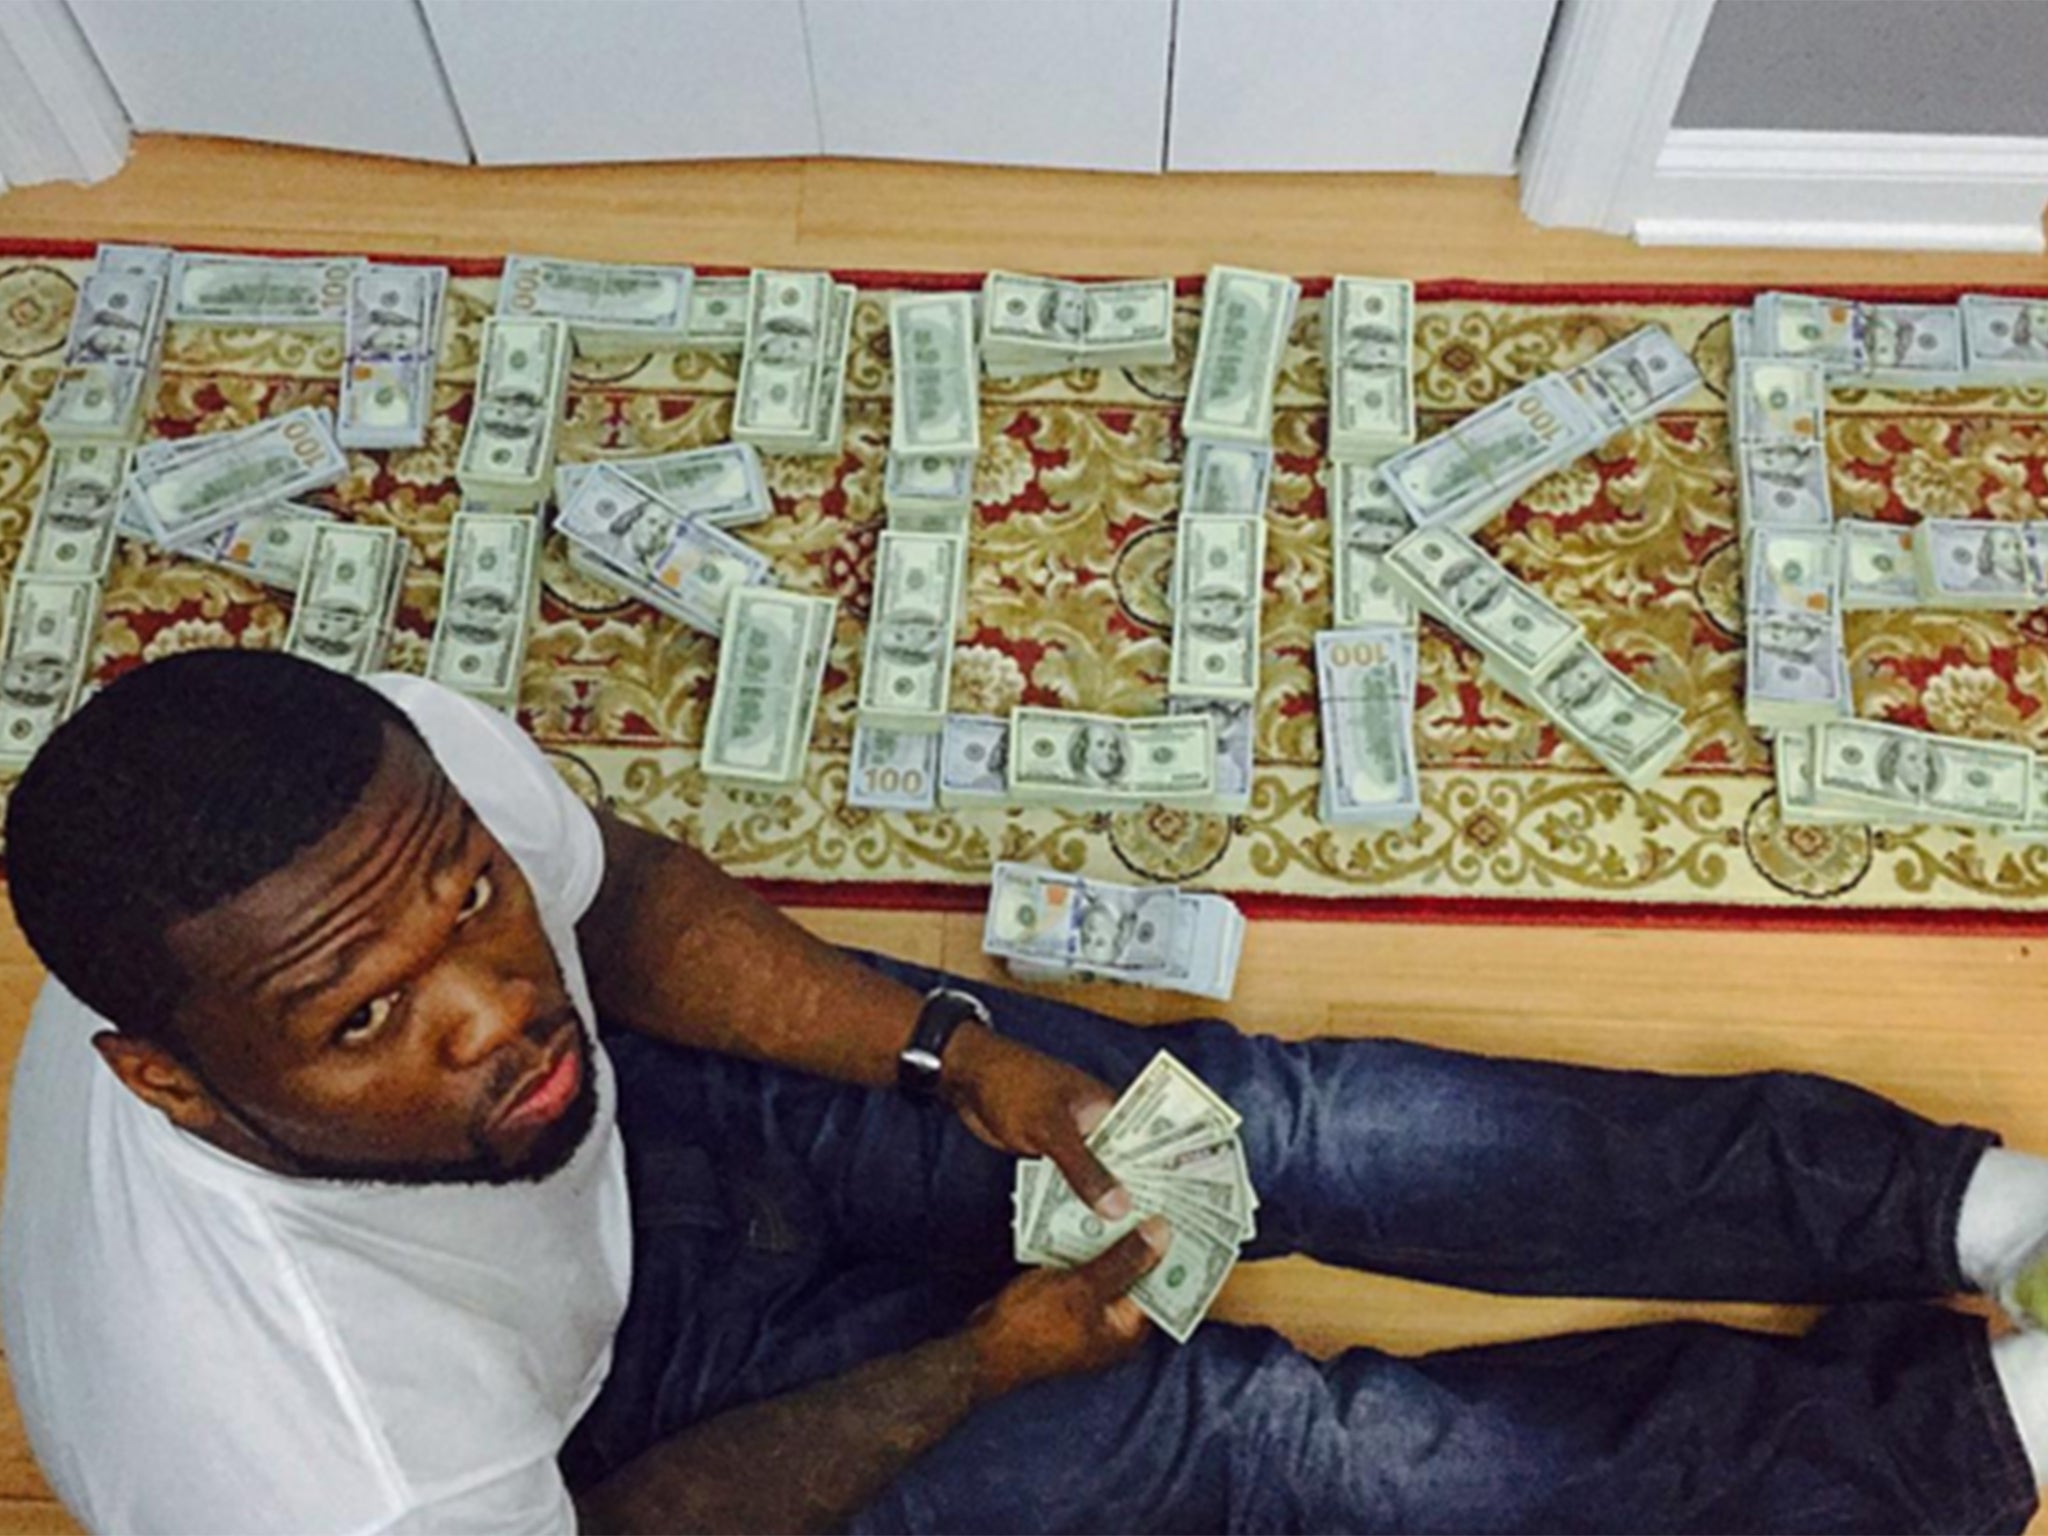 ‘Broke’ 50 Cent ordered to court after posing with cash on Instagram